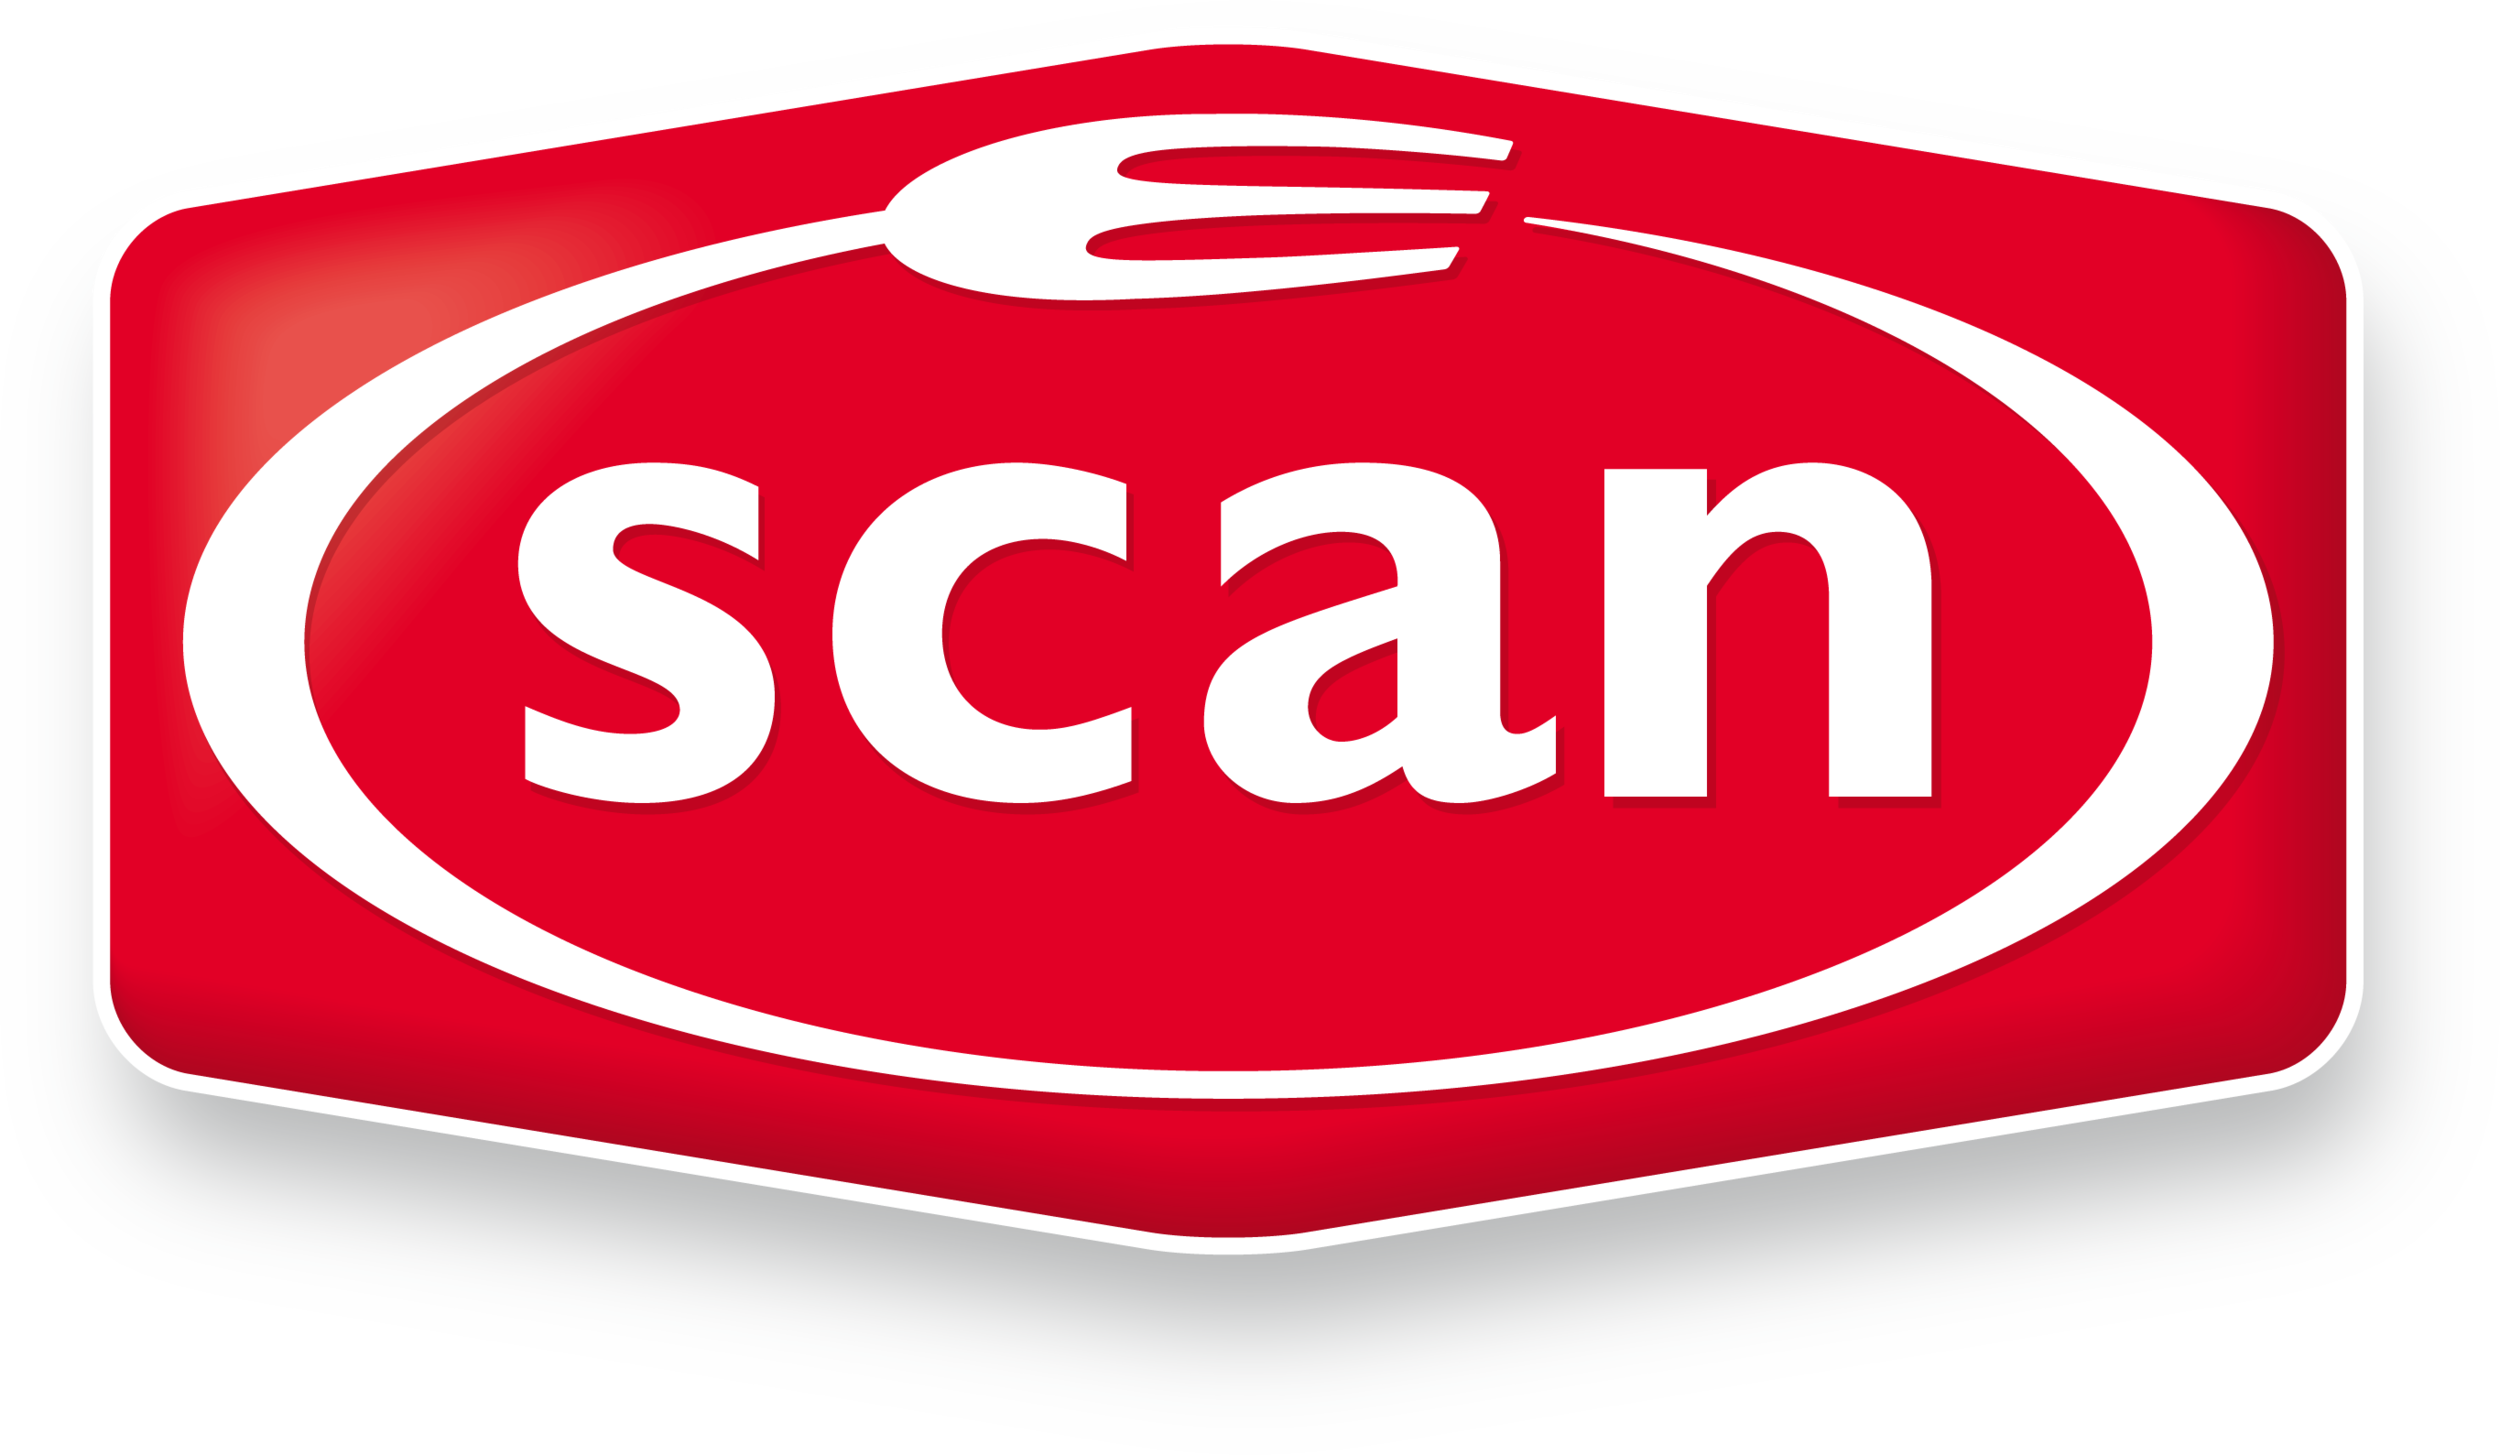 scan.png